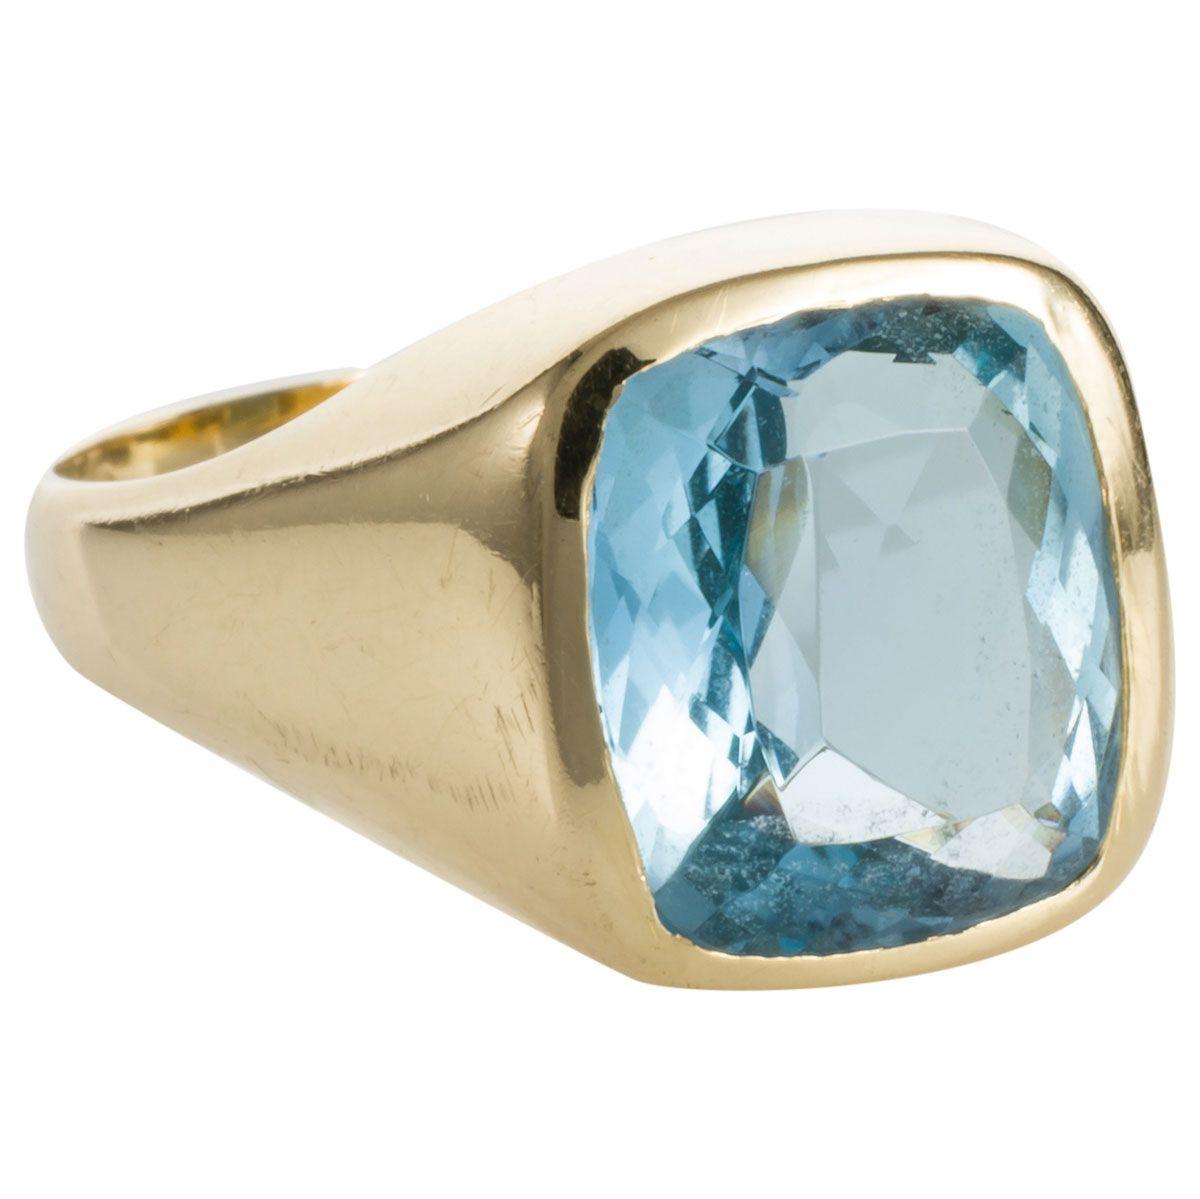 This style of ring has become so popular particularly for the ladies. Traditionally a gents style but the ladies are swooning over these signet rings. Perfect for the middle, ring or pinky finger. It features a beautifully faceted 5.20ct Aquamarine